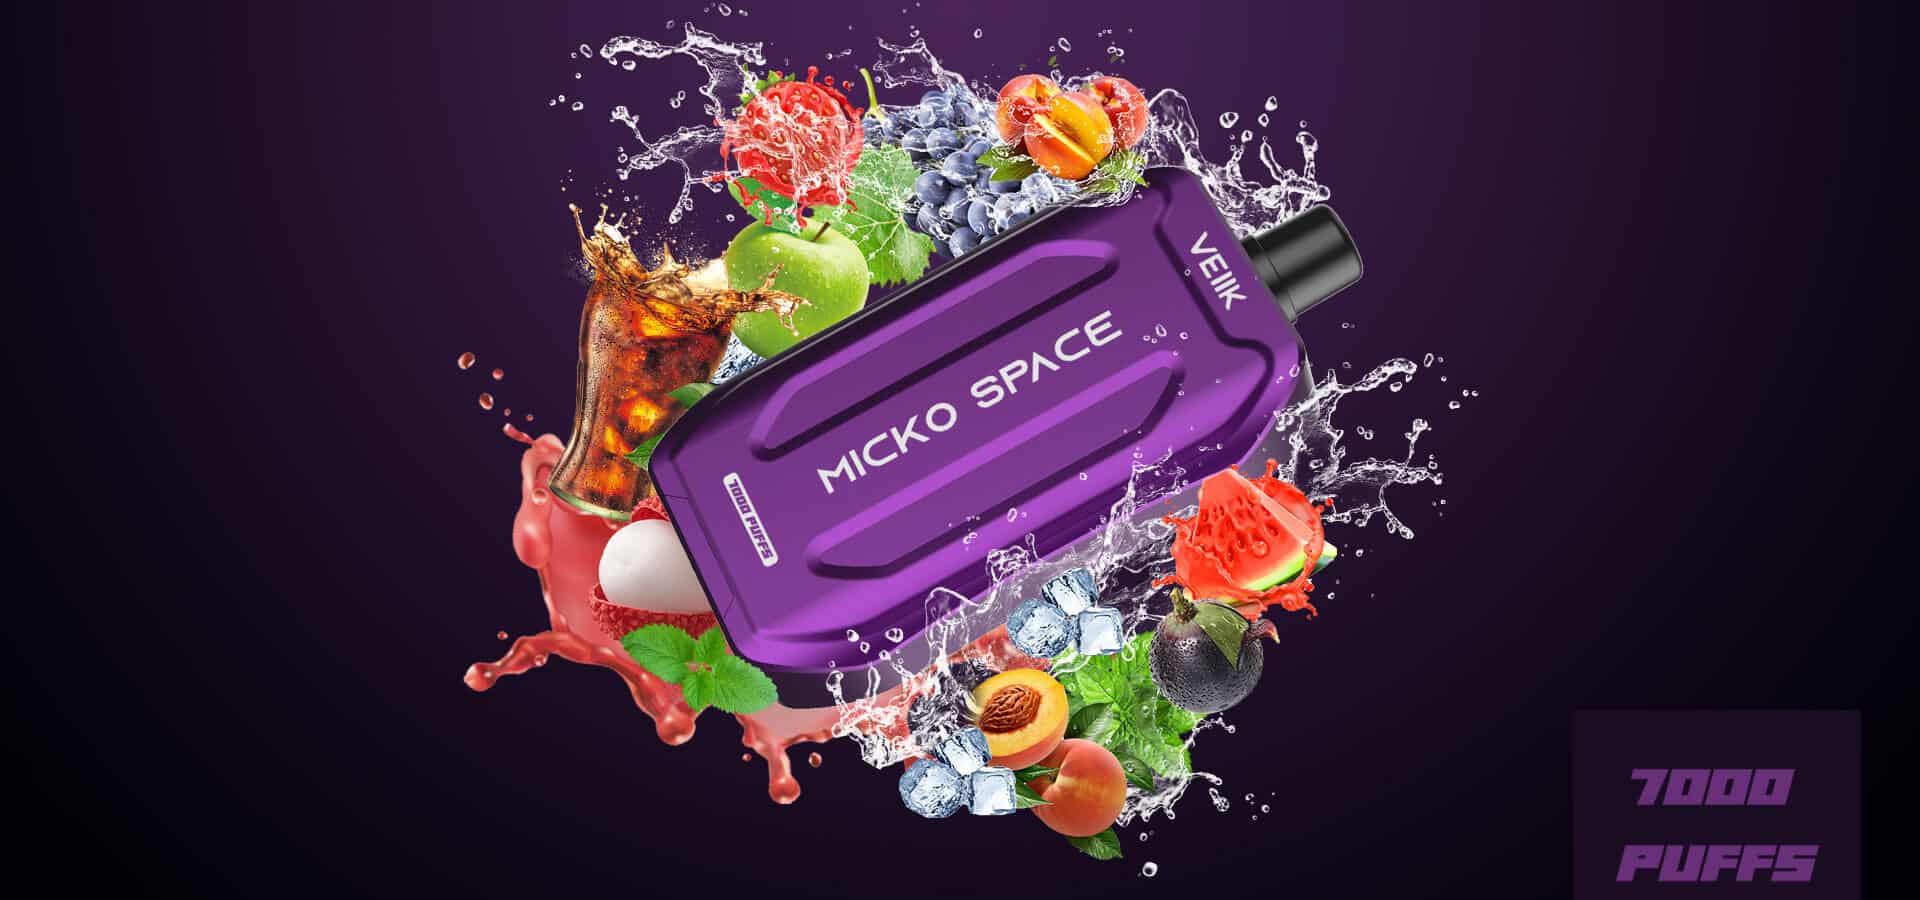 MICKO SPACE